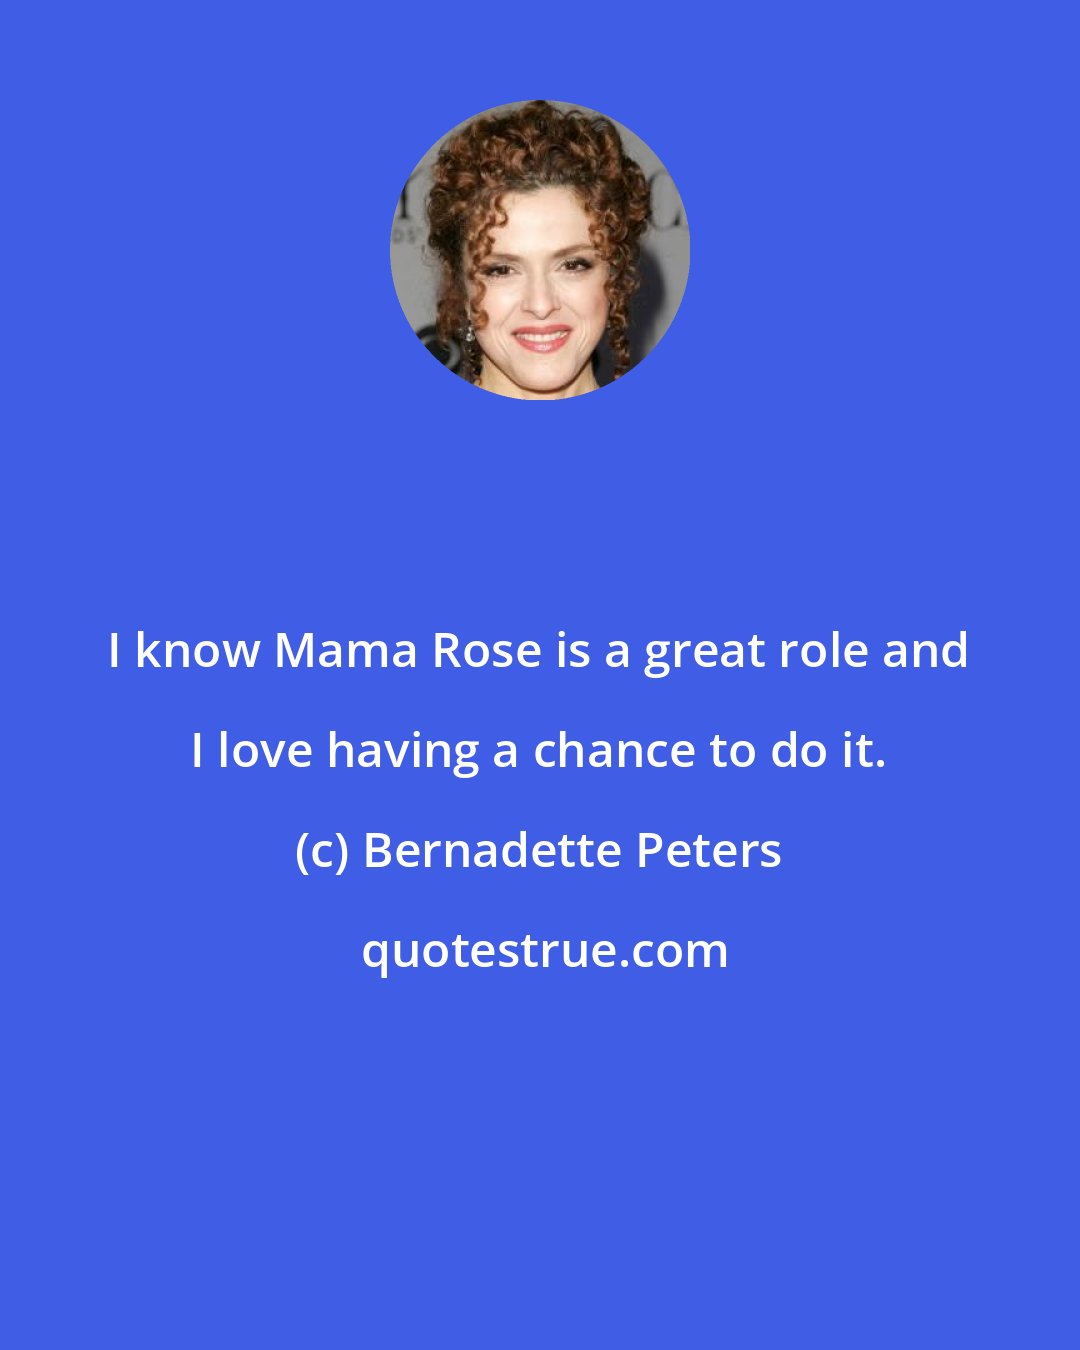 Bernadette Peters: I know Mama Rose is a great role and I love having a chance to do it.